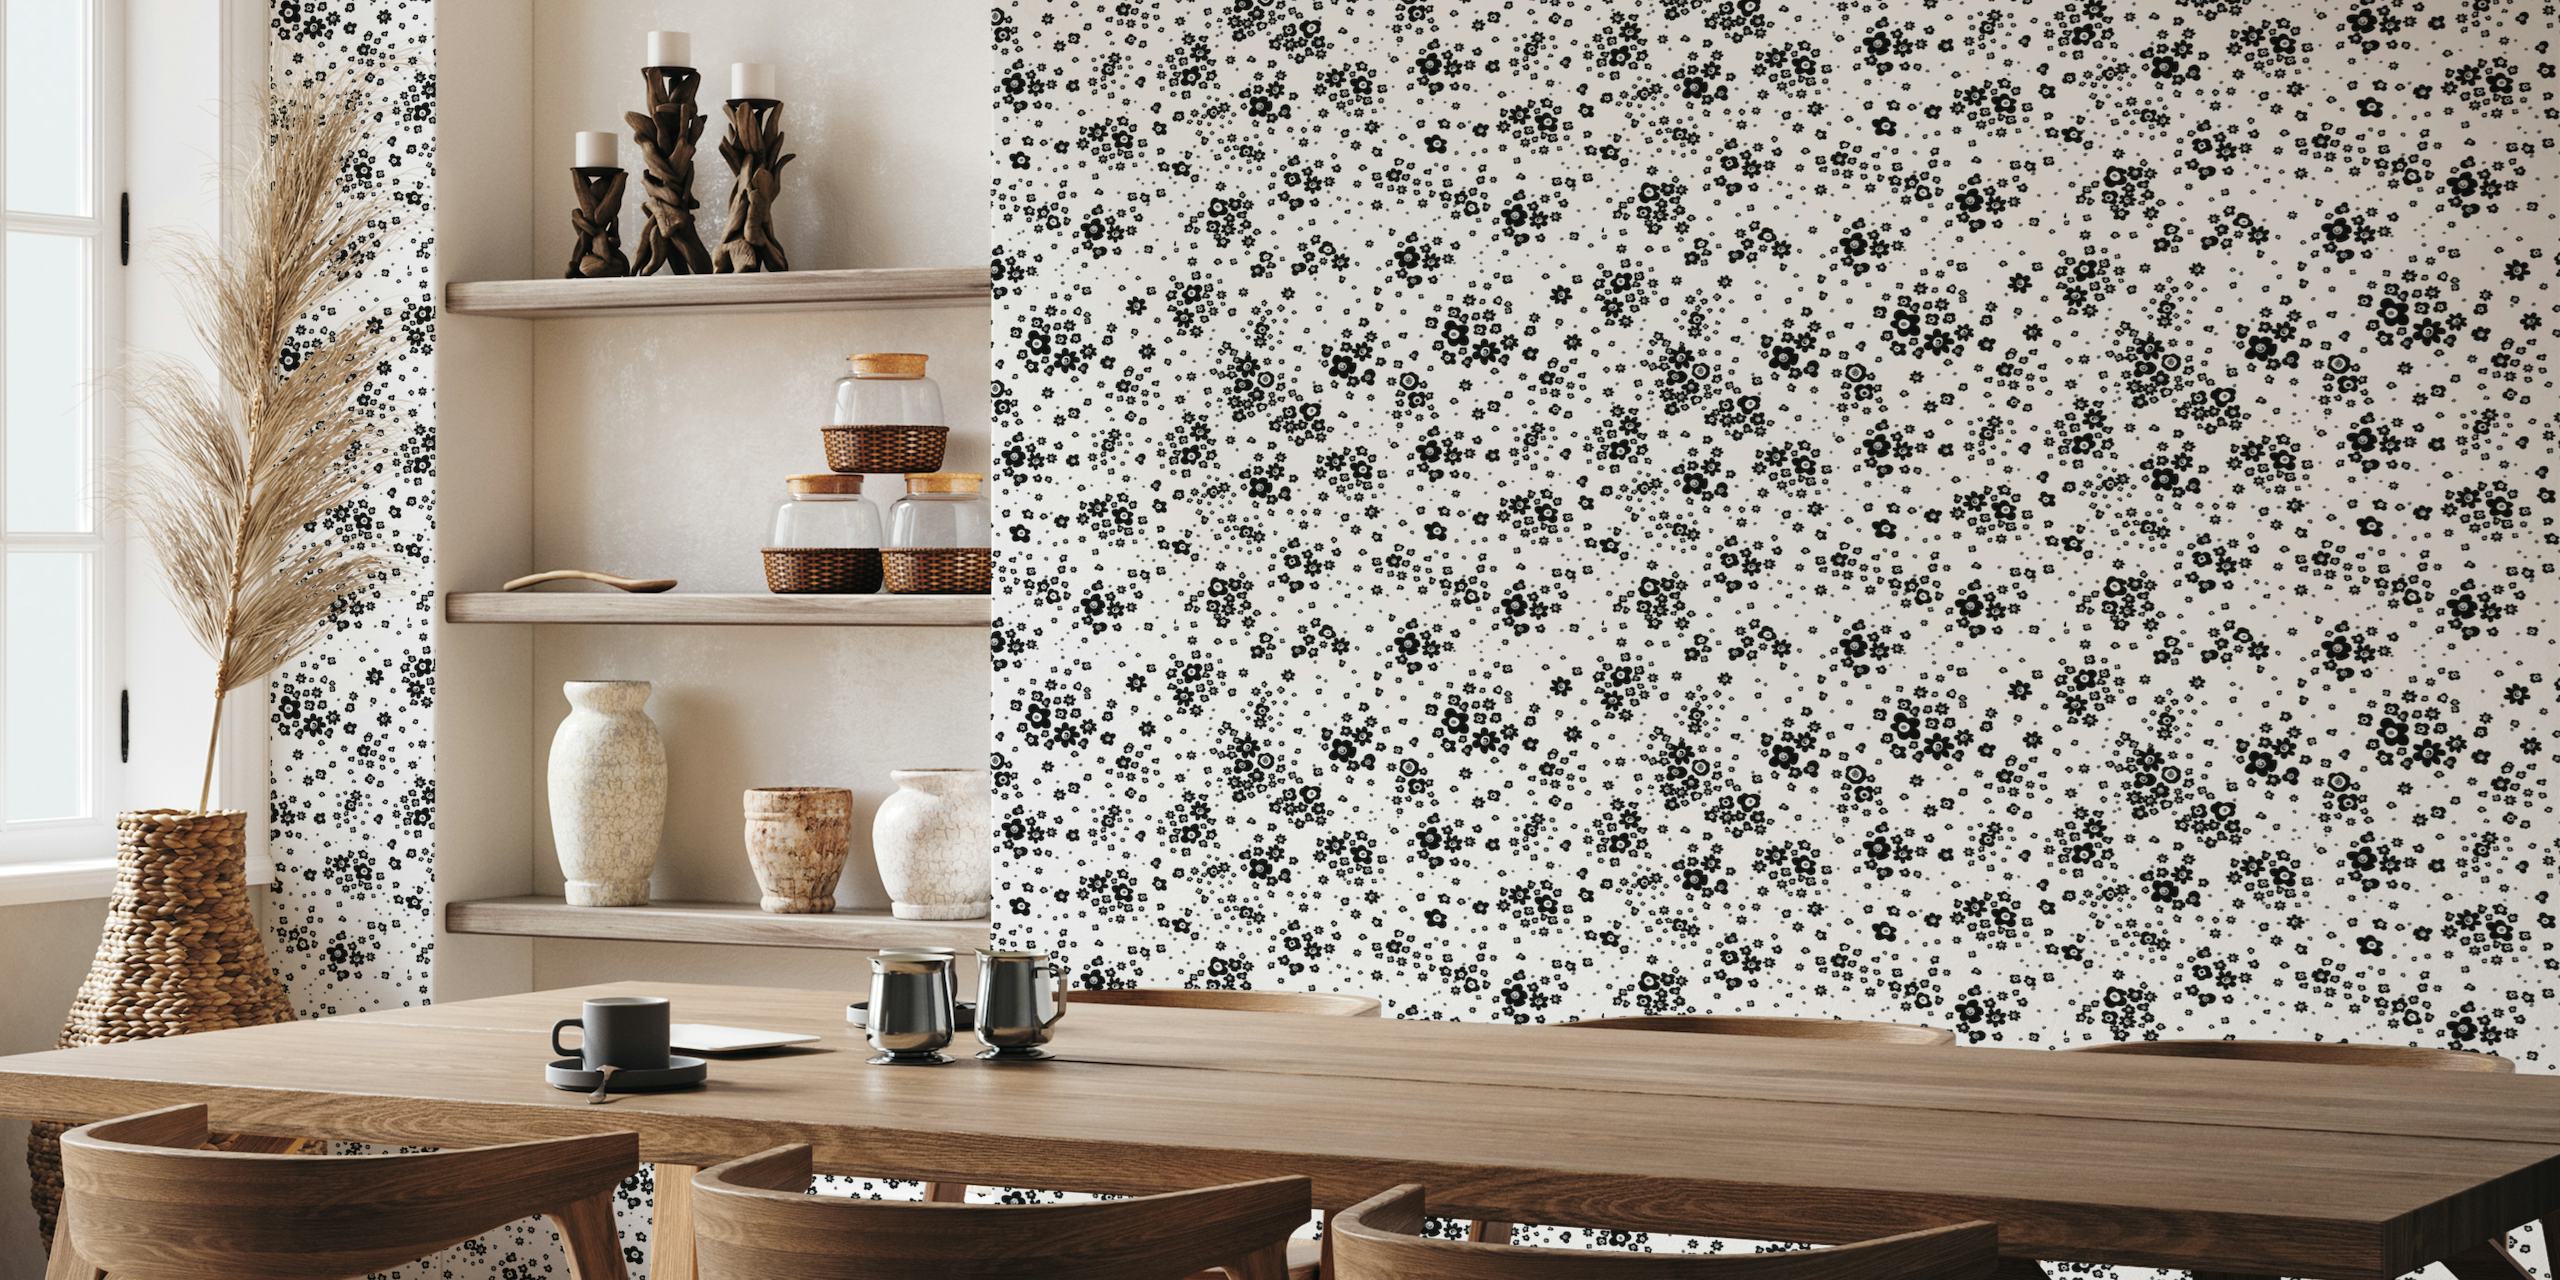 Black and white artistic wild ditsy flowers pattern papiers peint